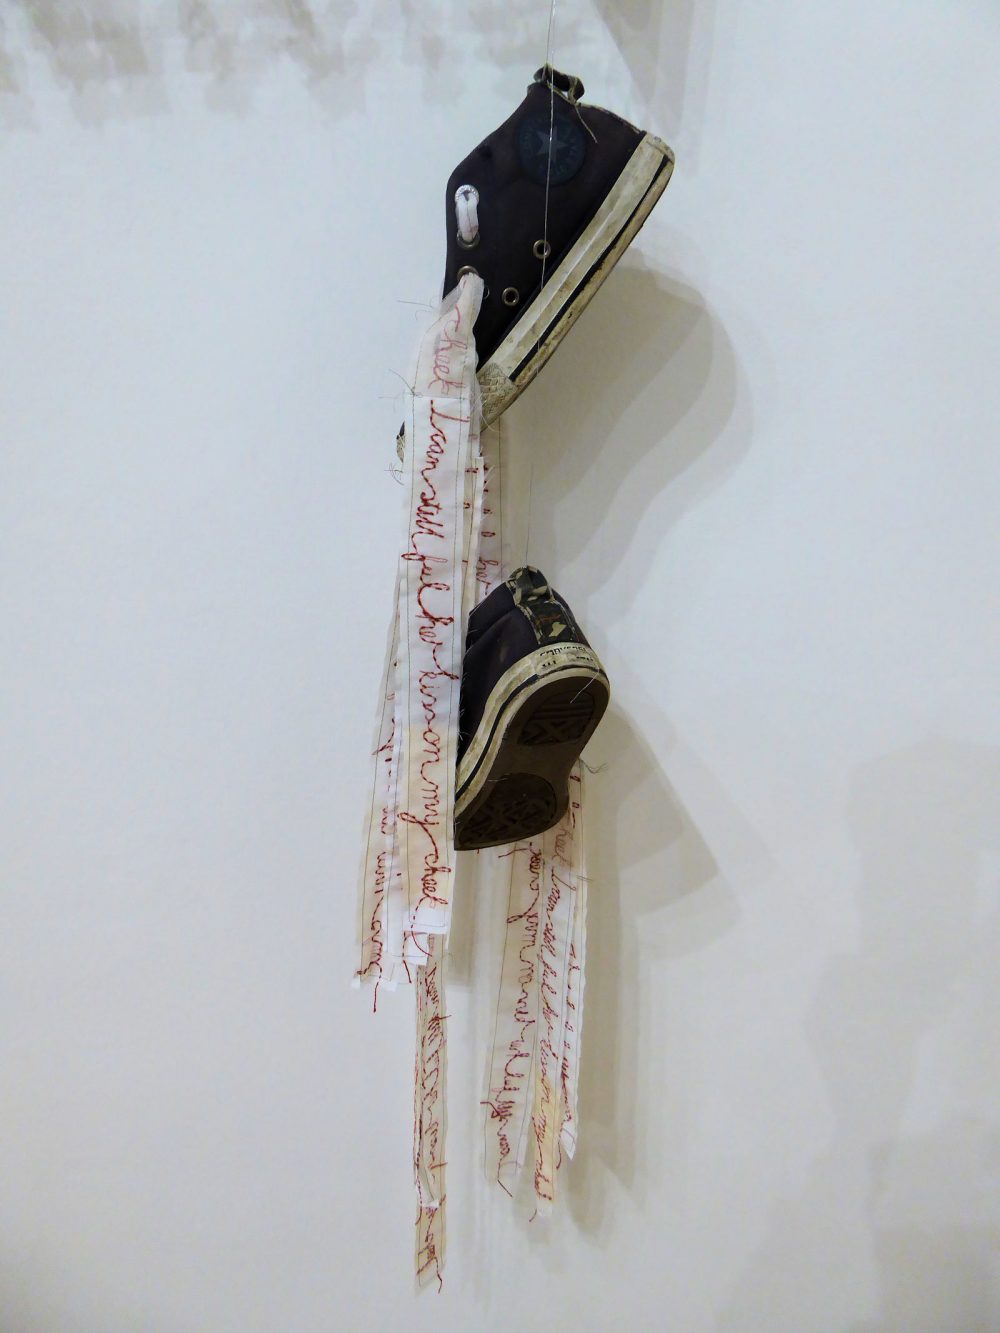 Pair of trainers with letter stitched laces hanging from end section